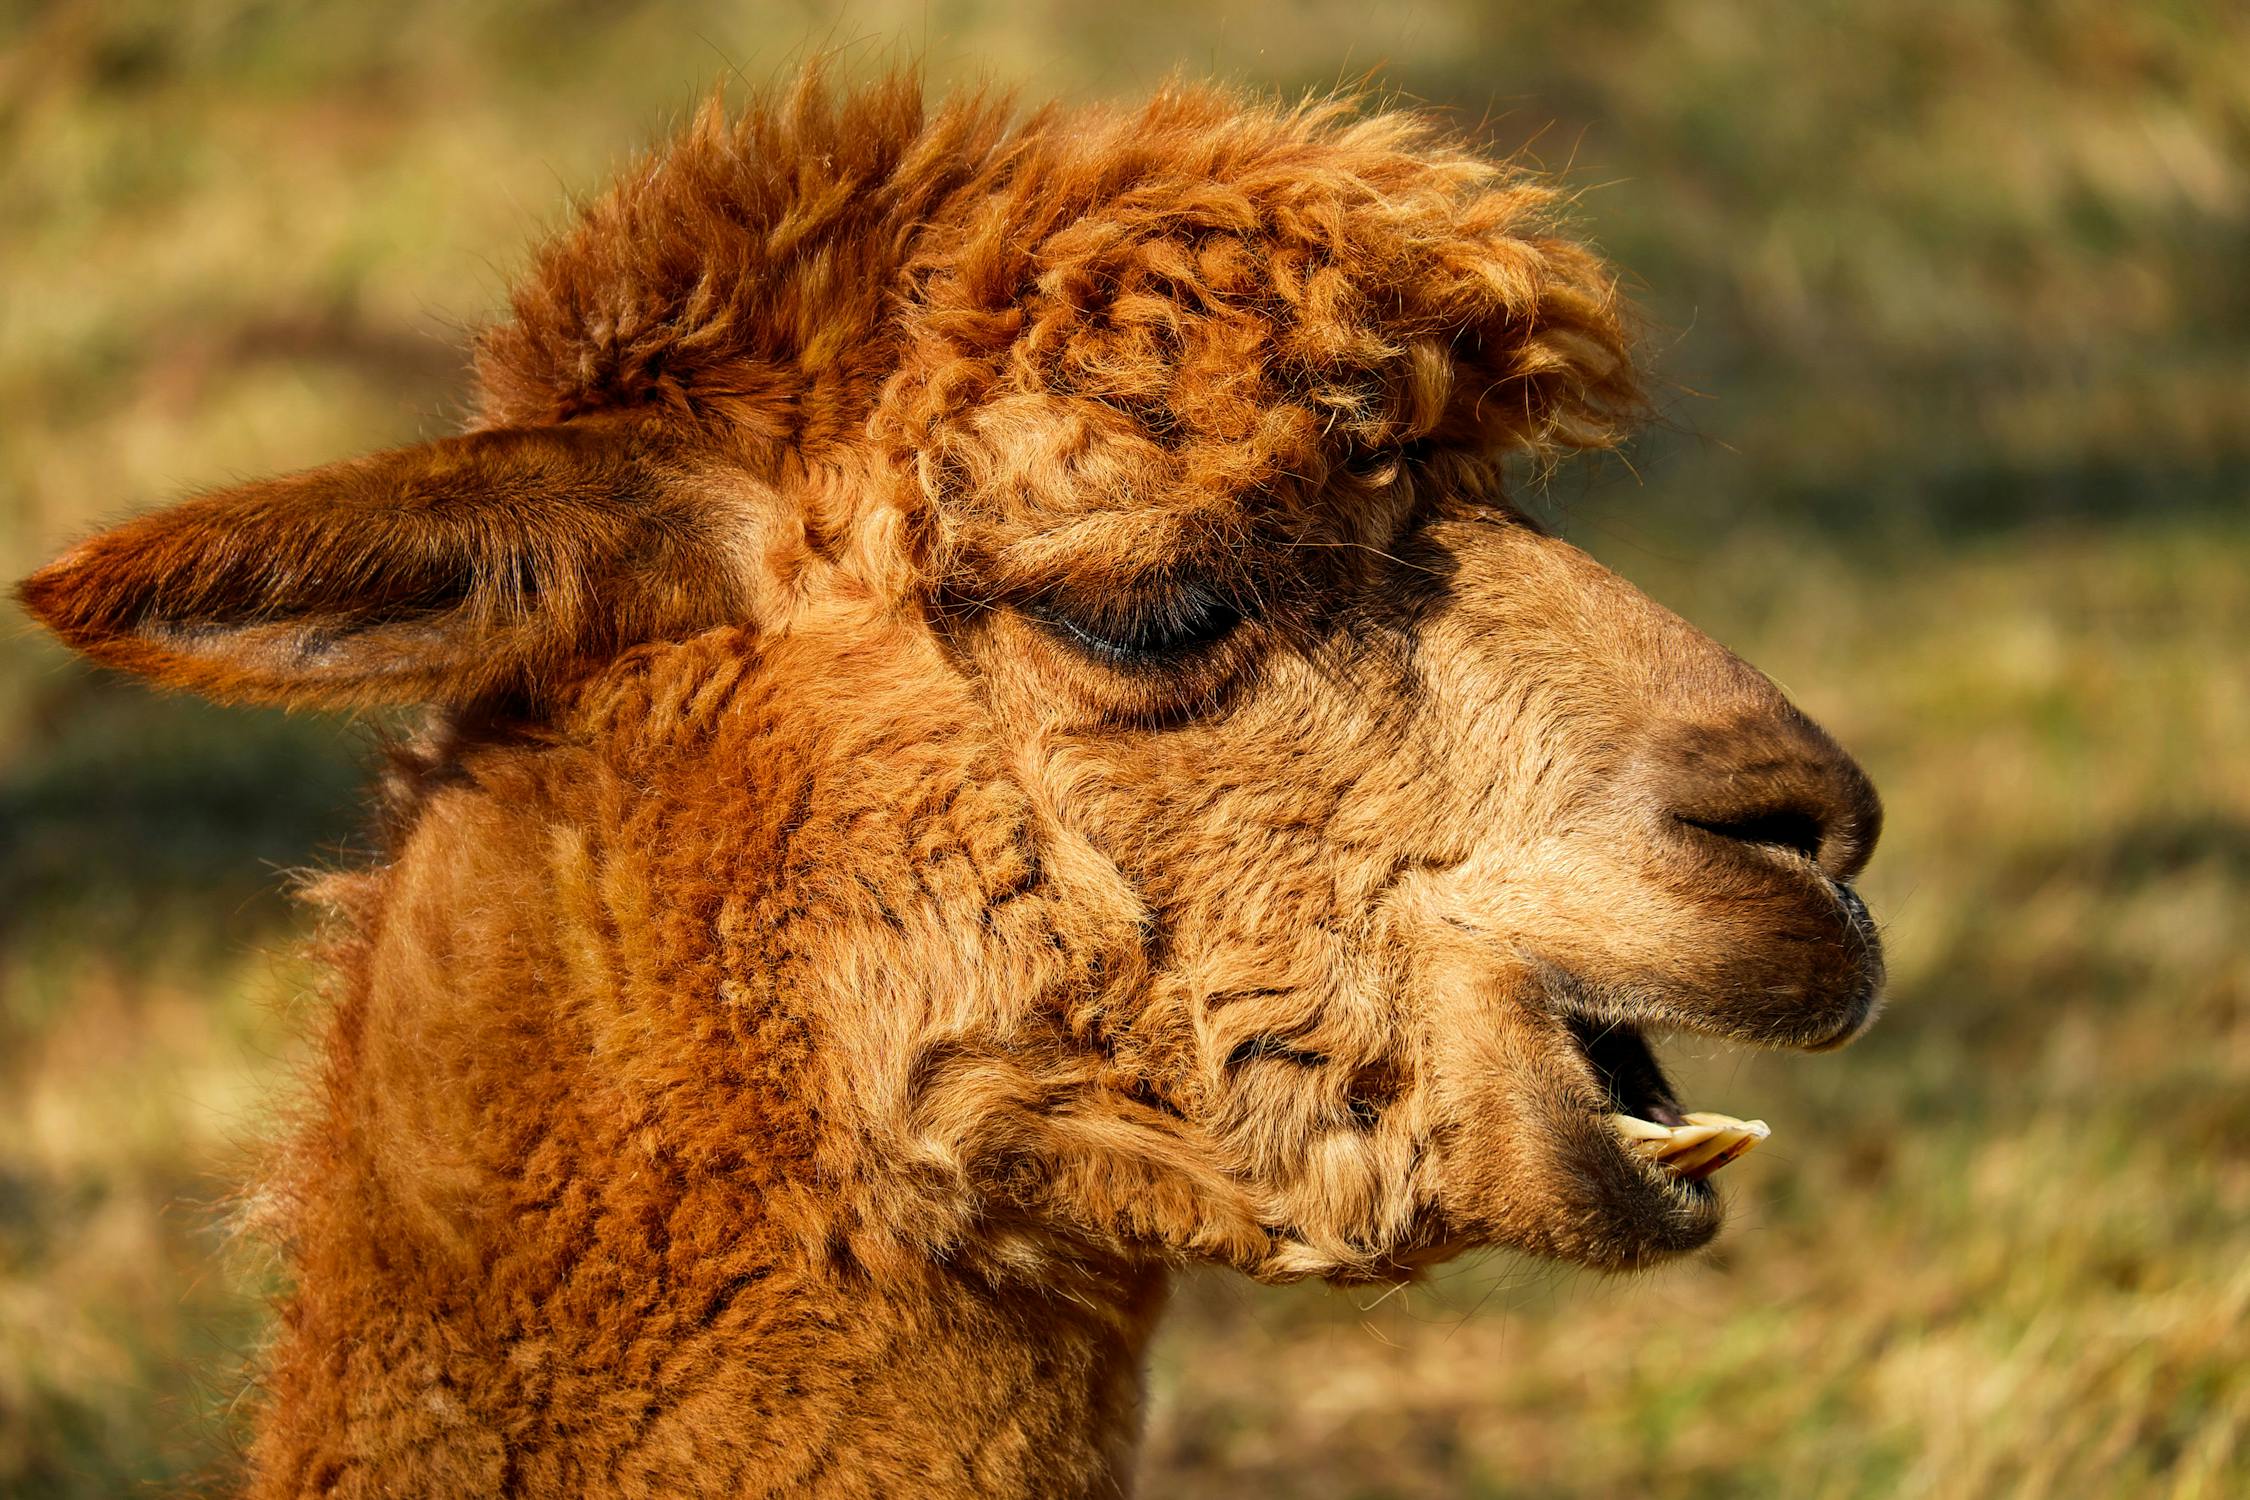 Brown Llama In Close Up Photography · Free Stock Photo